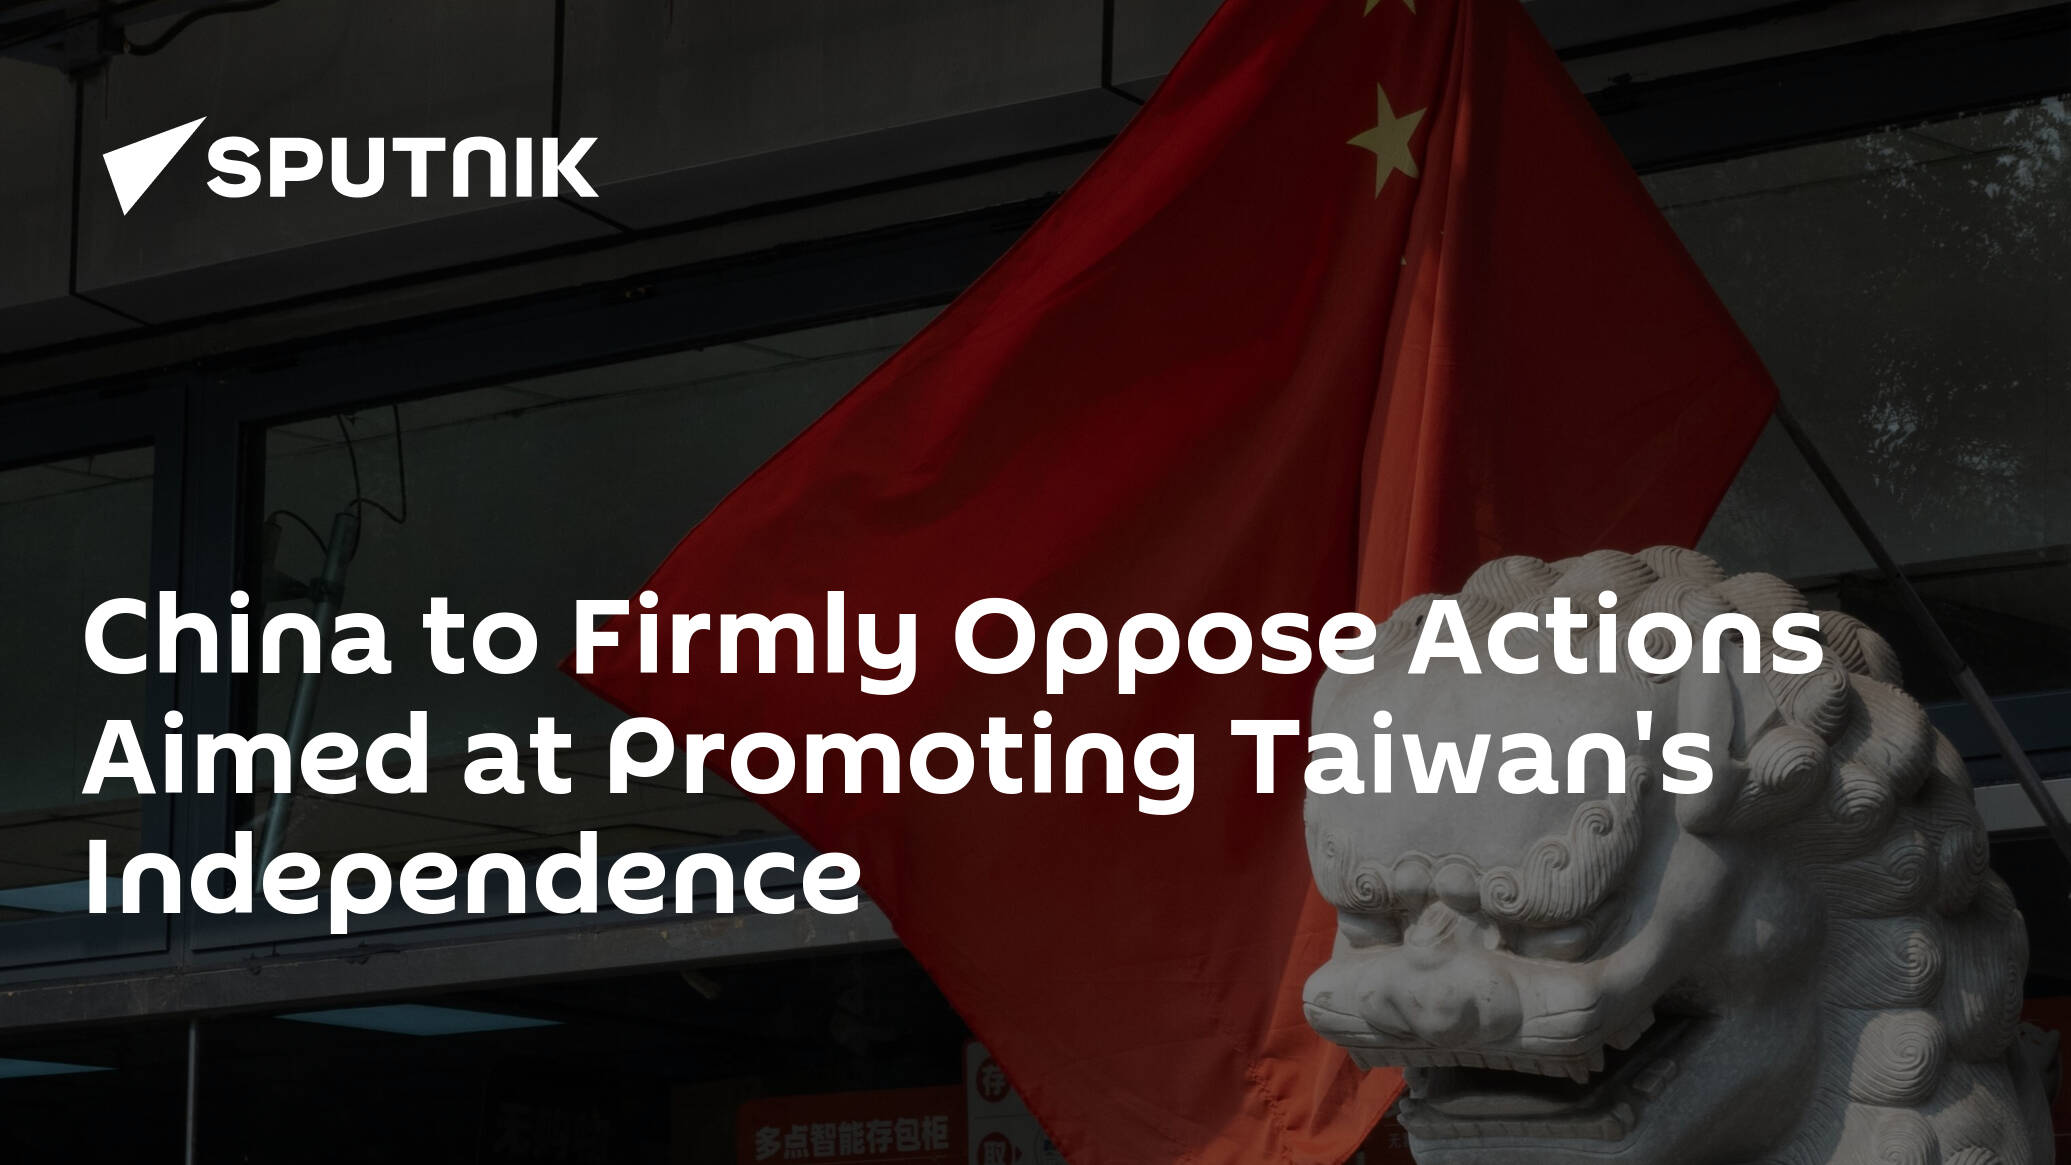 China to Firmly Oppose Actions Aimed at Promoting Taiwan's Independence